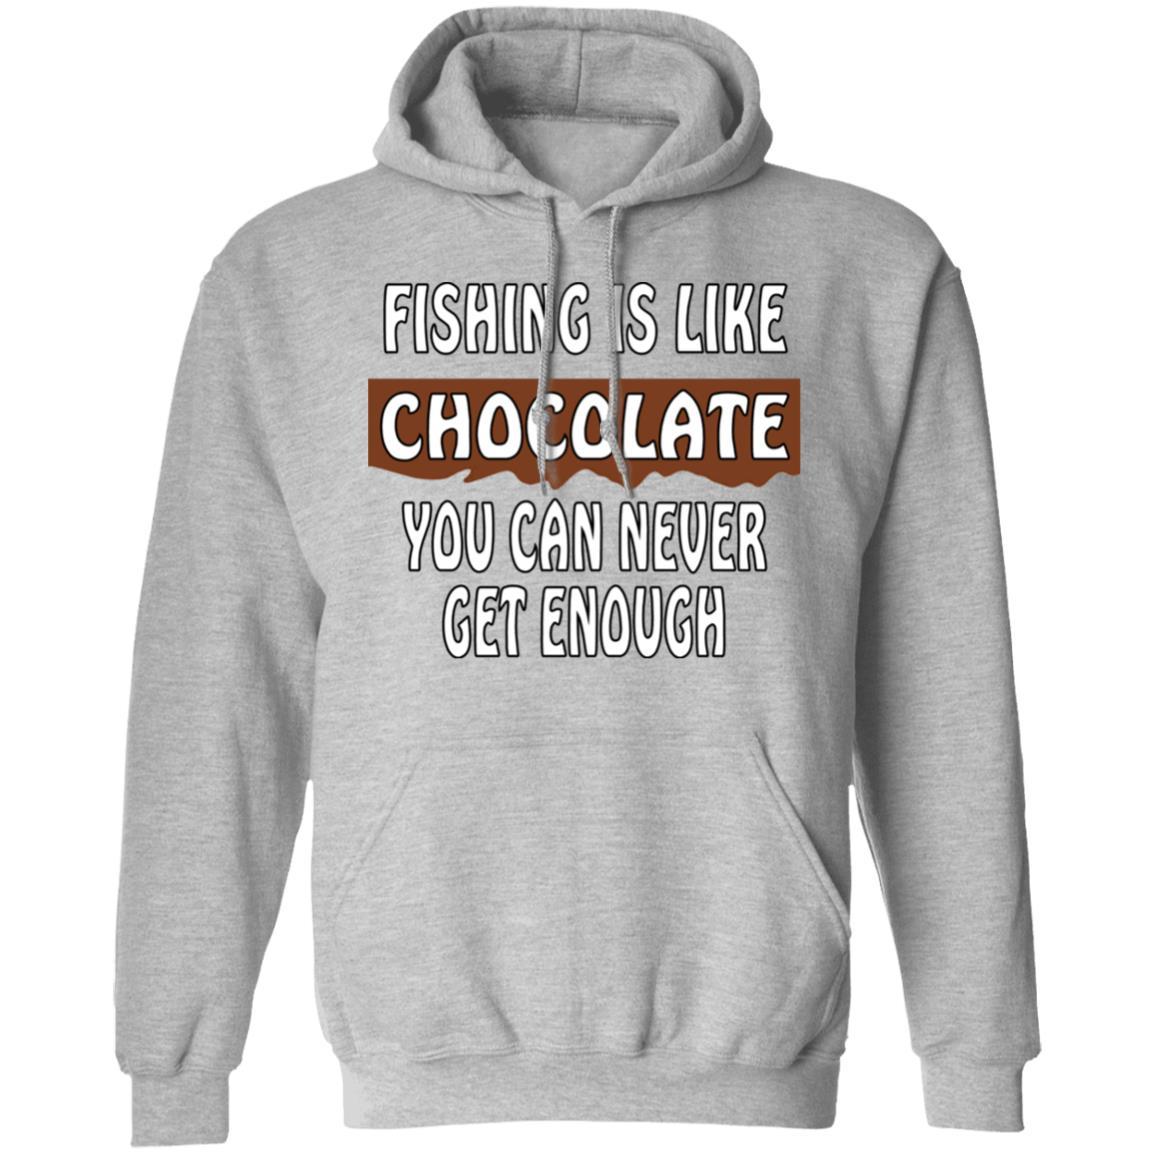 Fishing is like chocolate you can never get enough hoodie sport-grey